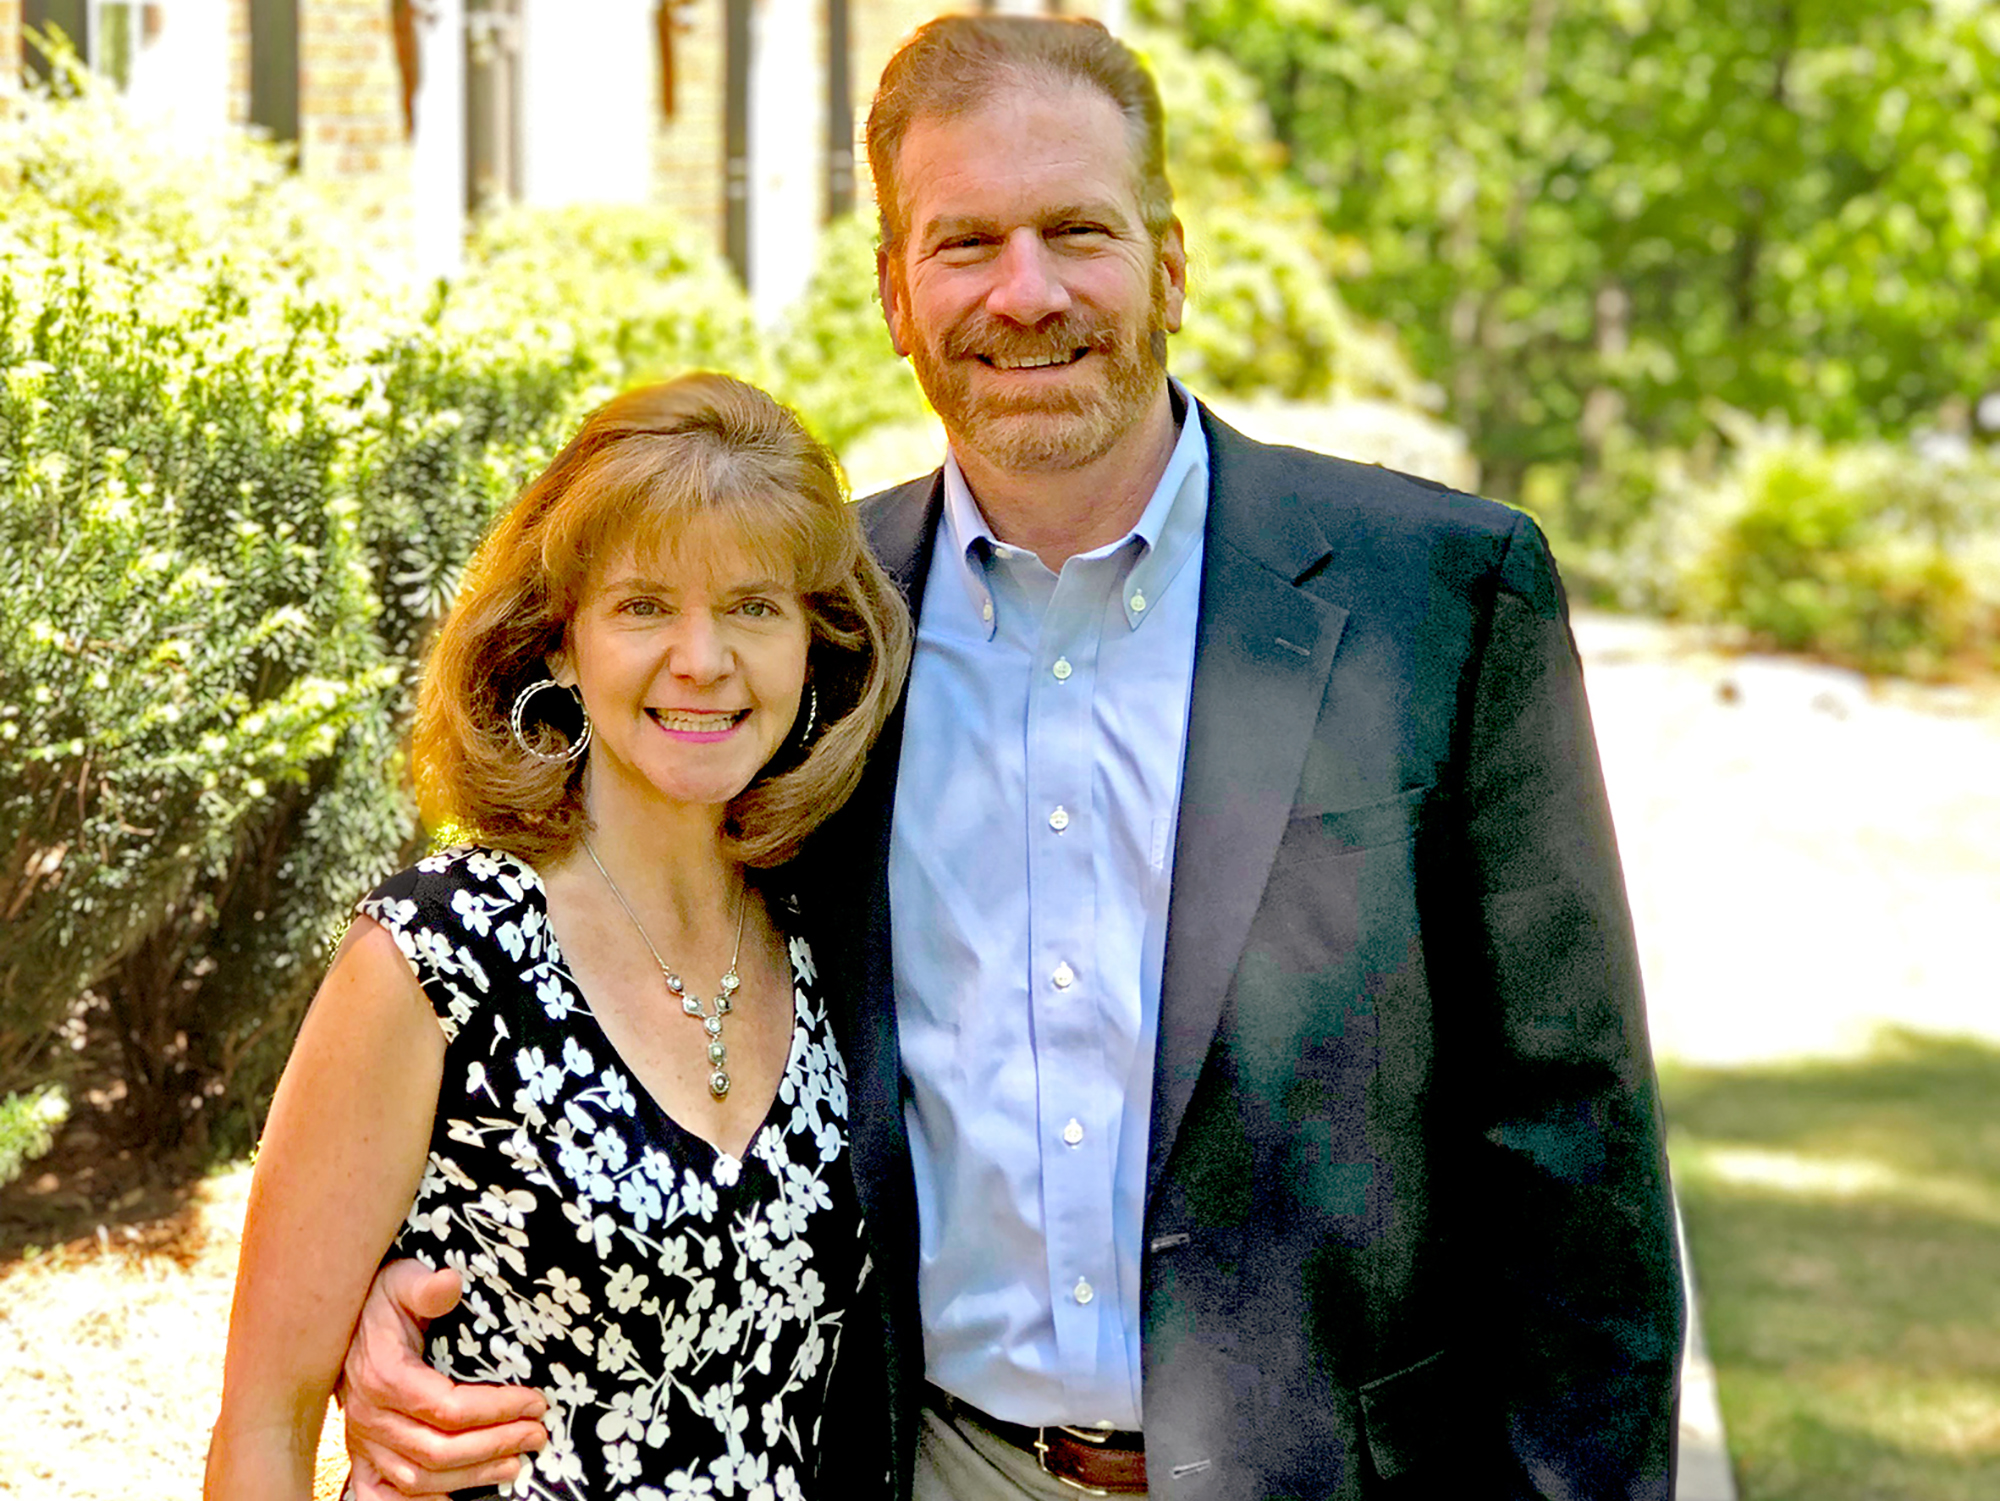 Brian and Kim Cain: Success driven by service